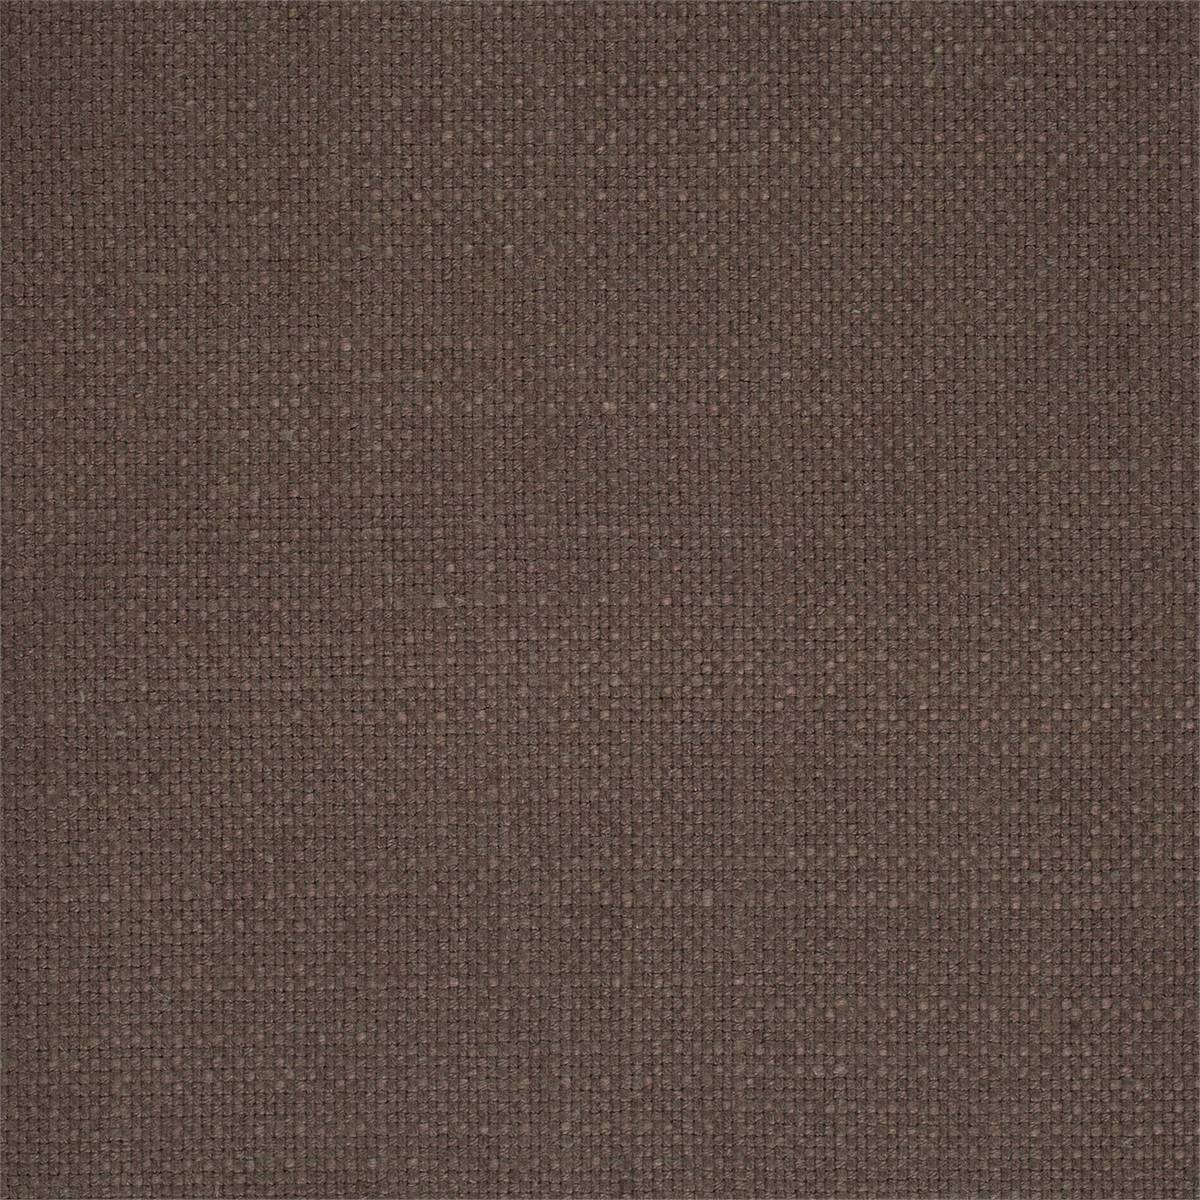 Tuscany Sable Fabric by Sanderson